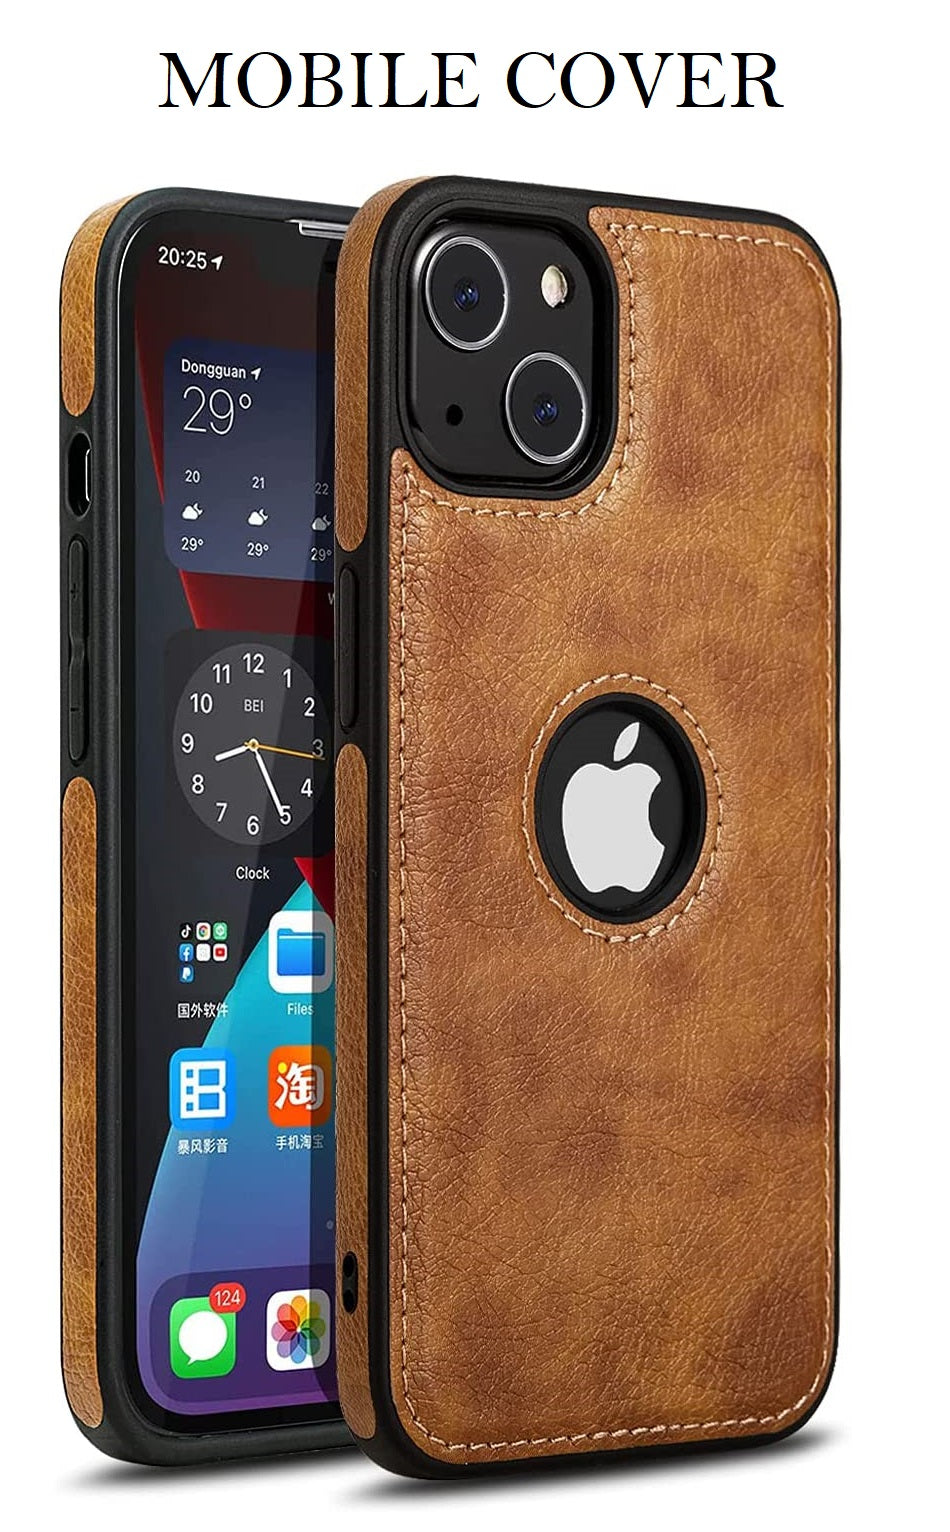 Excelsior Premium PU Leather Back Cover case For Apple iPhone 13